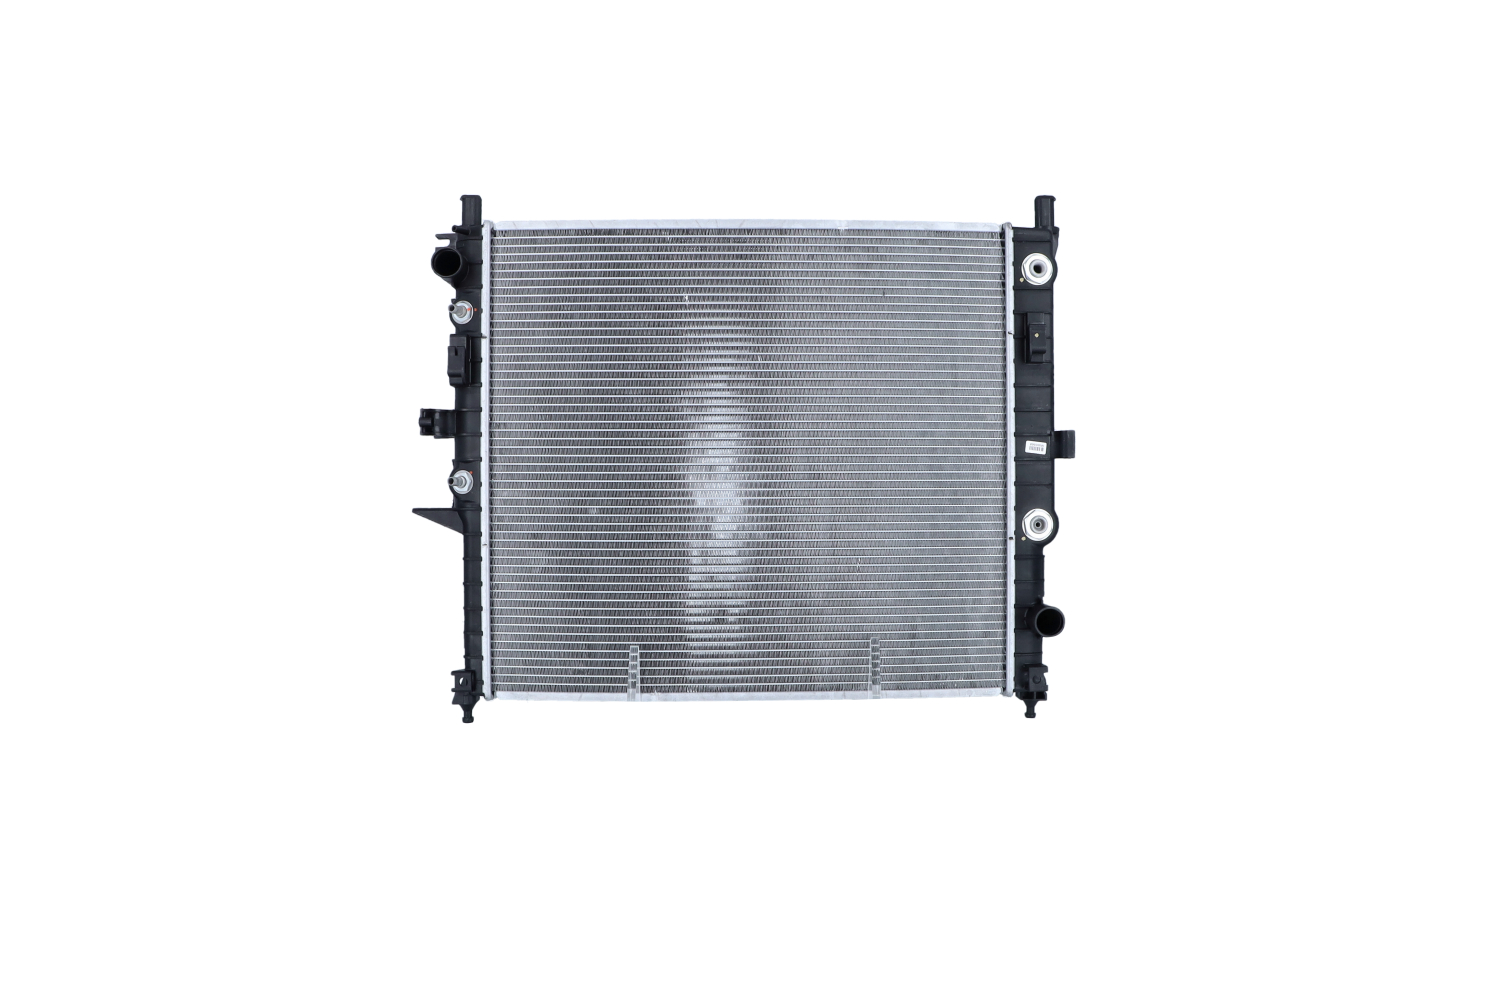 NRF 55336 Engine radiator Aluminium, 610 x 545 x 42 mm, with mounting parts, Brazed cooling fins